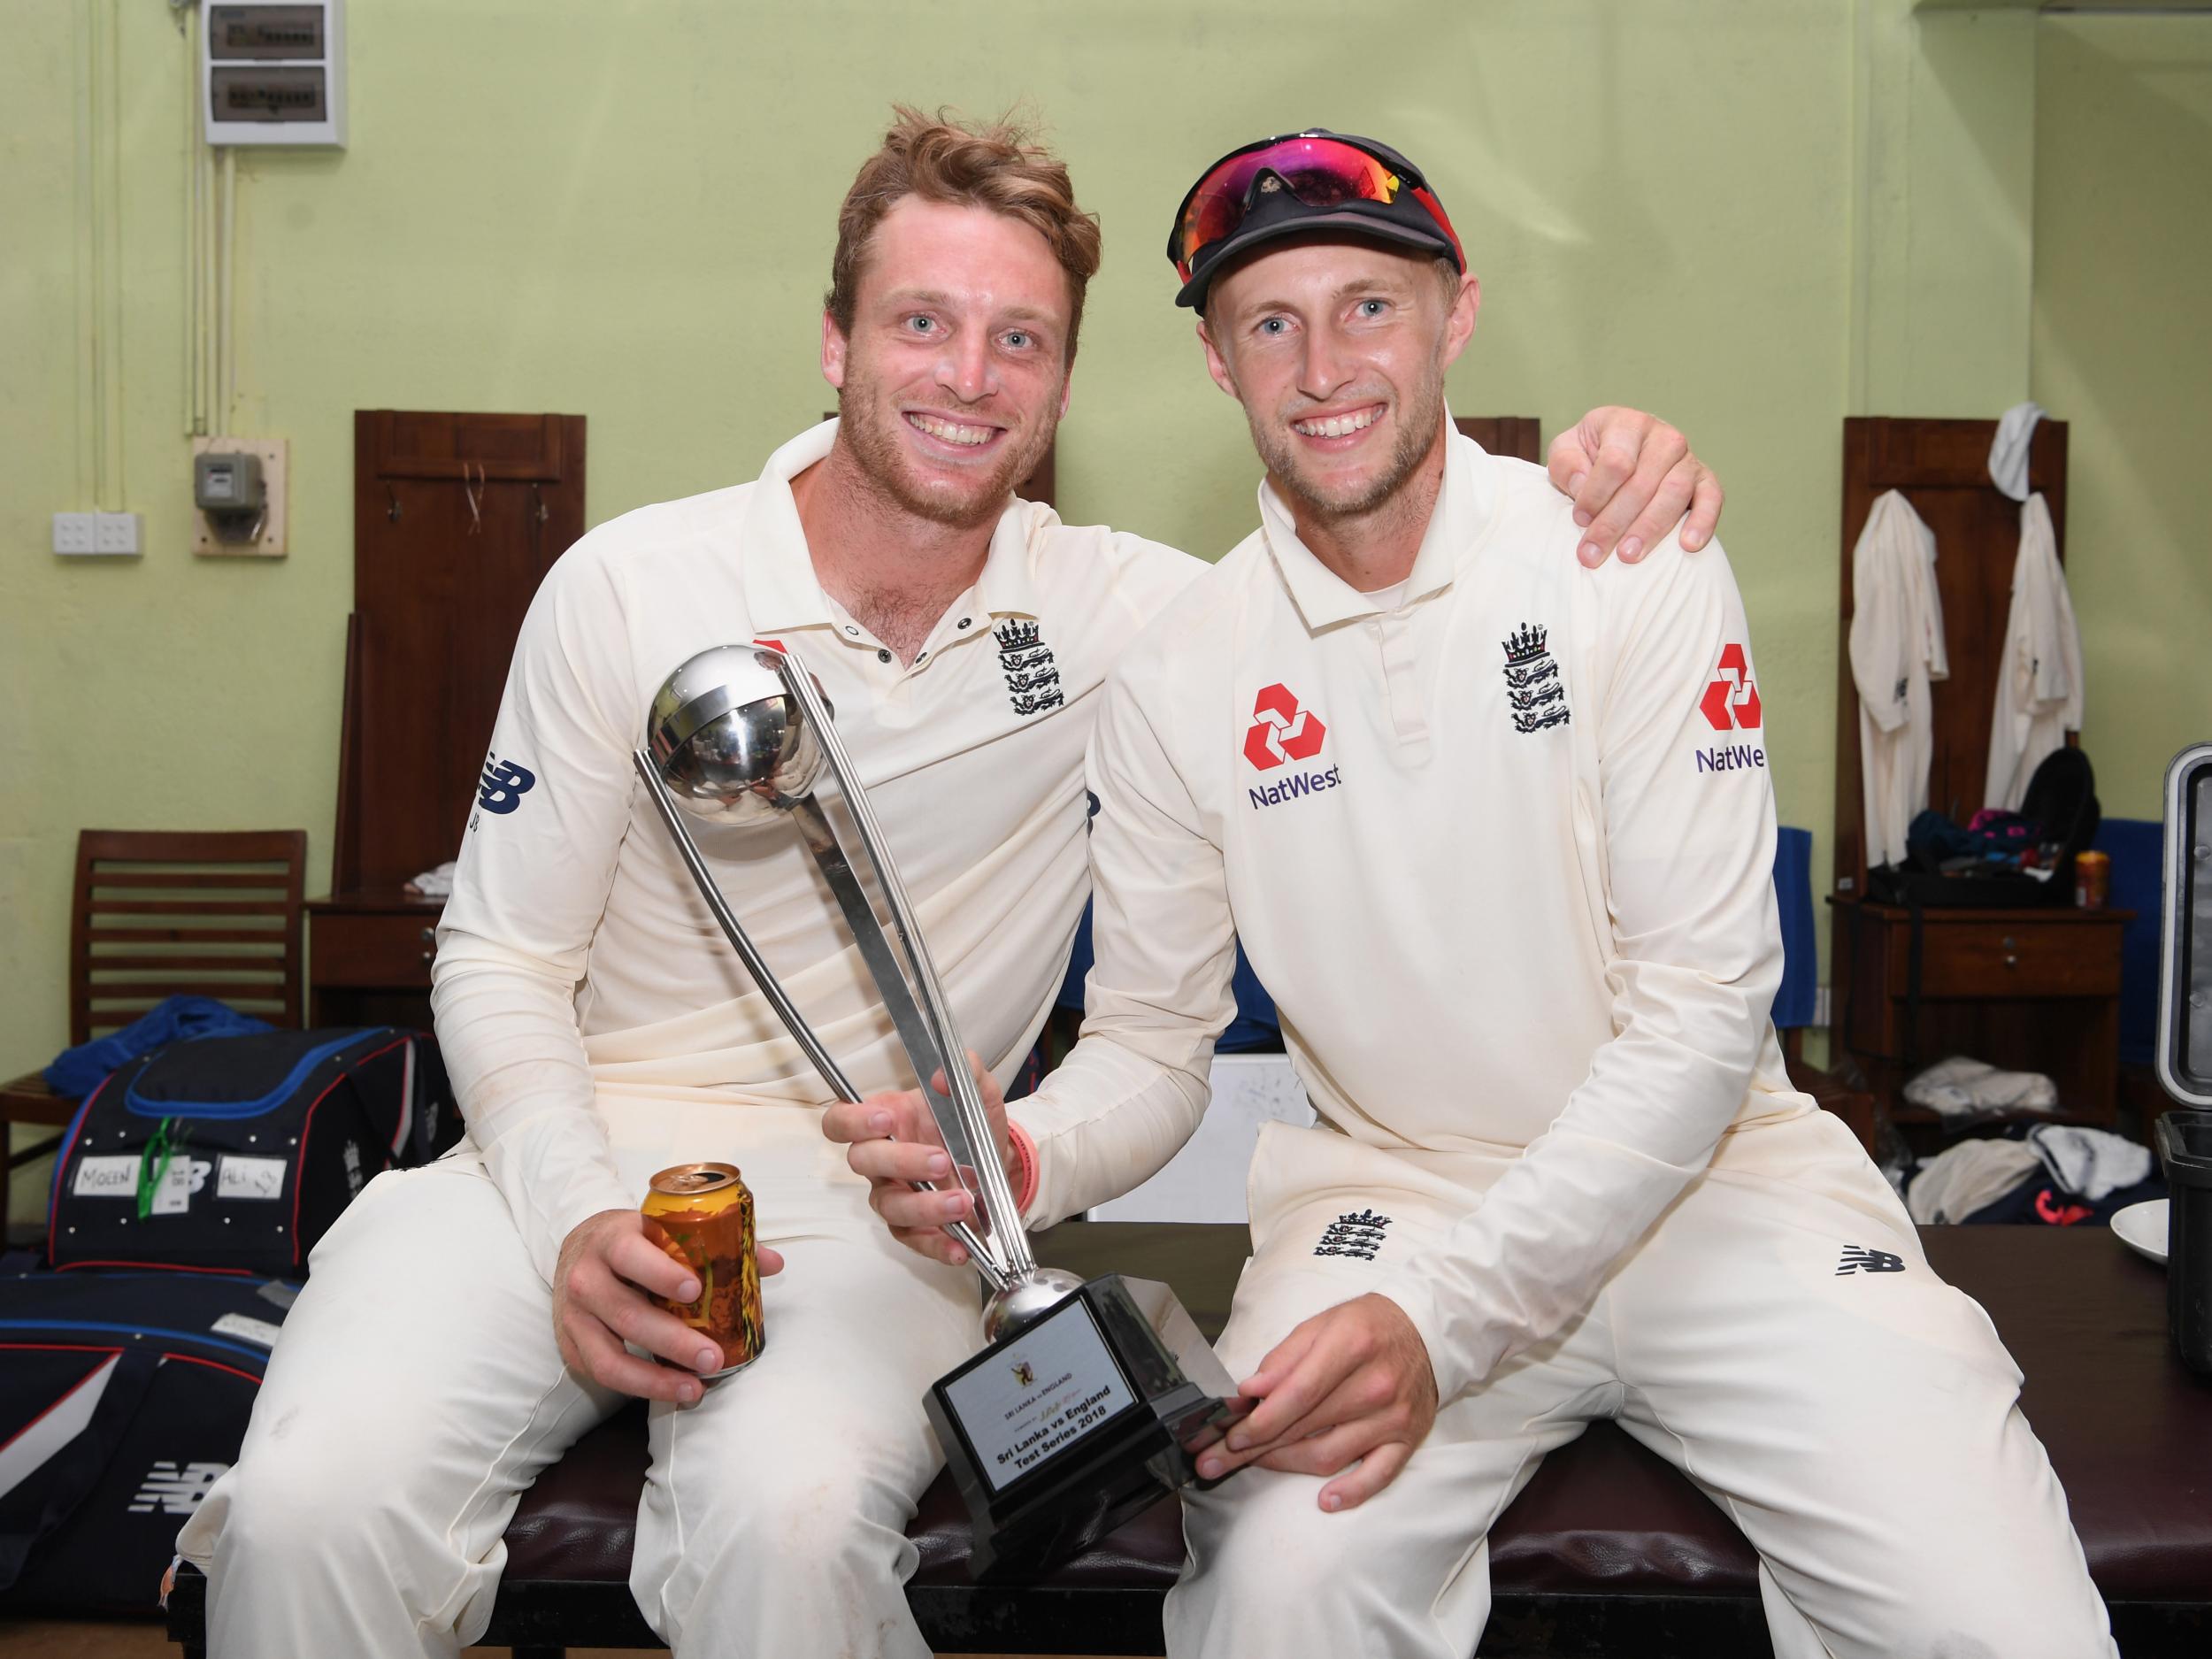 Joe Root says England can take pride in their 3-0 win